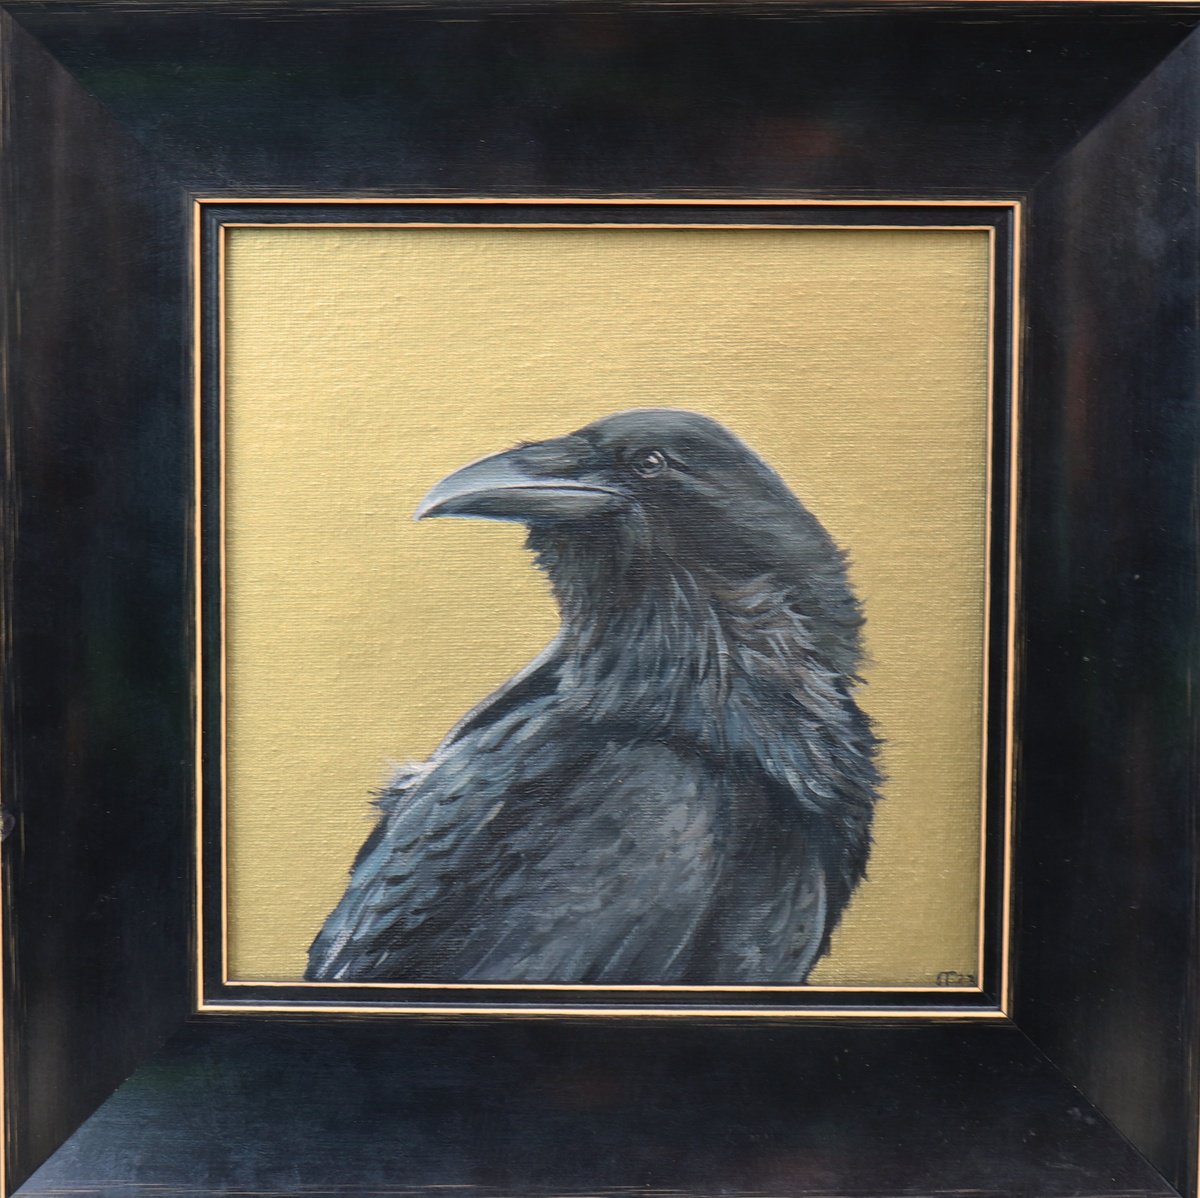 Raven in Gold by Alex Jabore